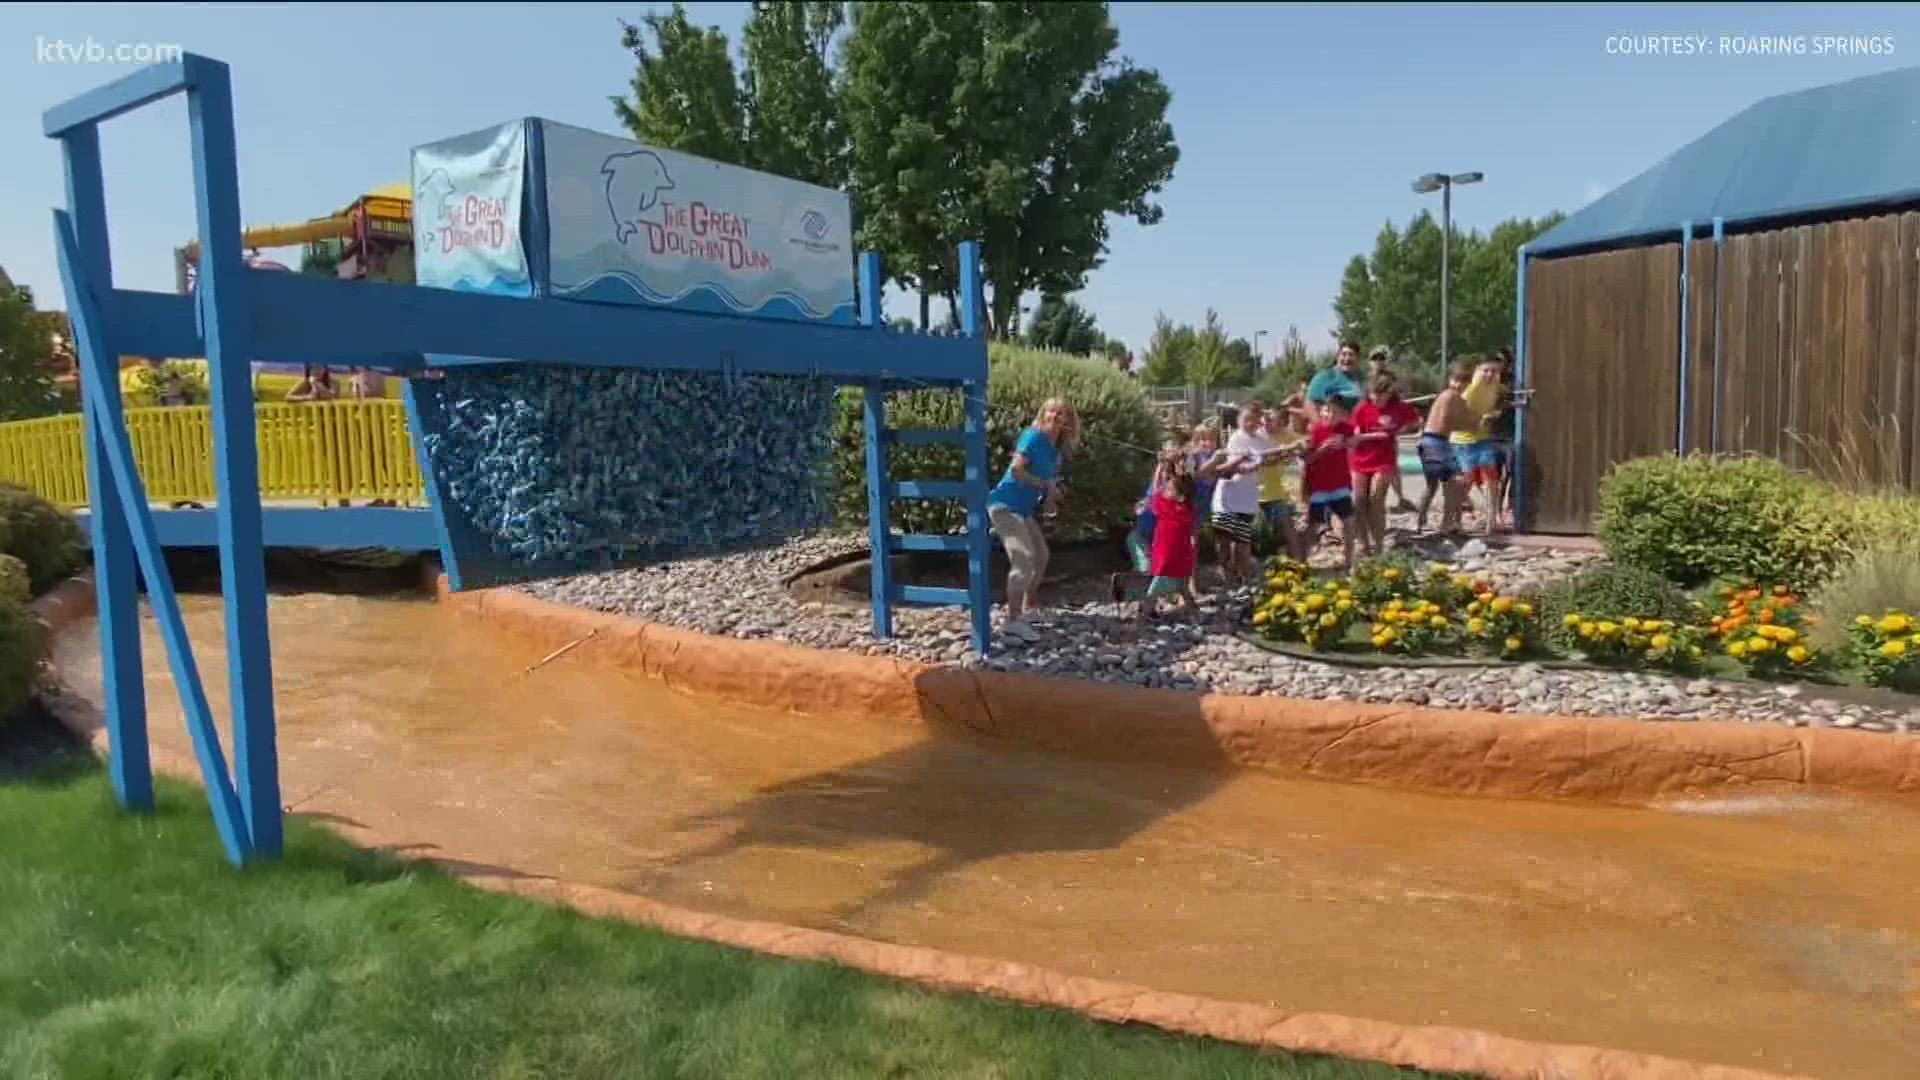 The annual Great Dolphin Dunk has raised nearly $1 million in the past 21 years.